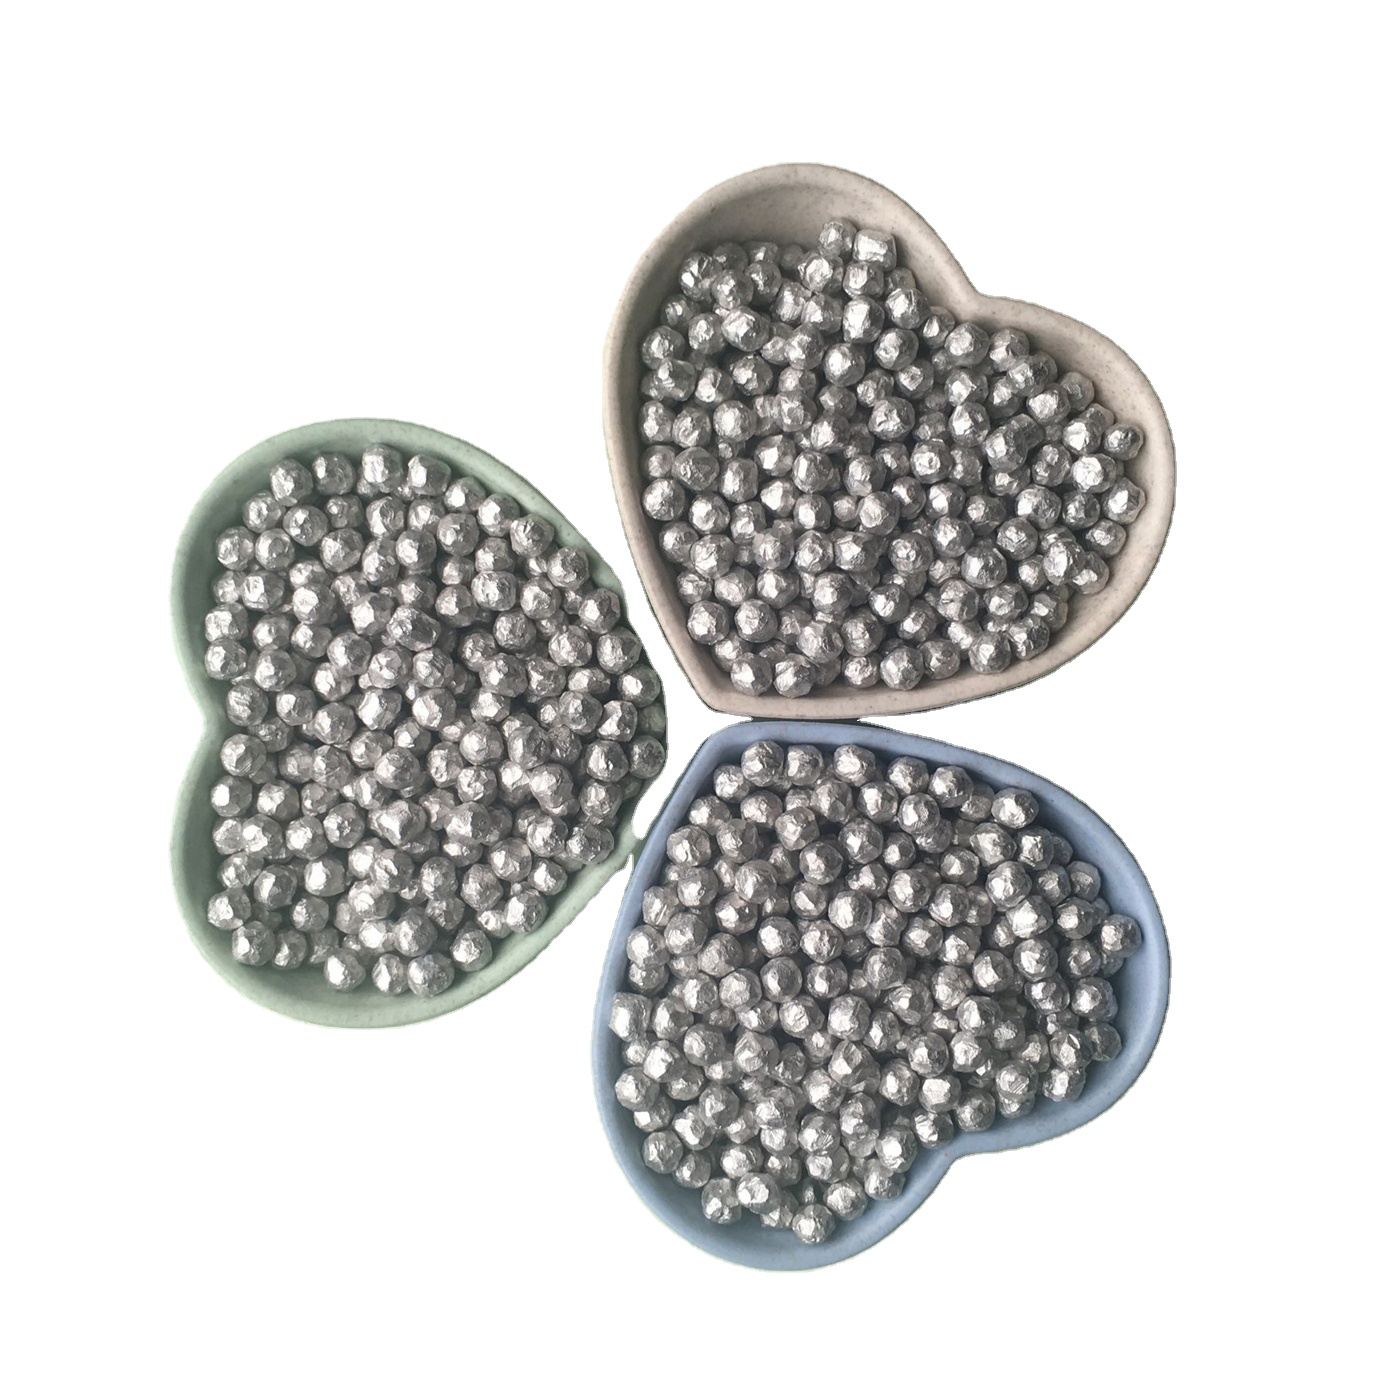 Negative Potential Orp Magnesium Balls For Antioxidant Hydrogen Water Anti Radiation / Magnesium Prill Beads